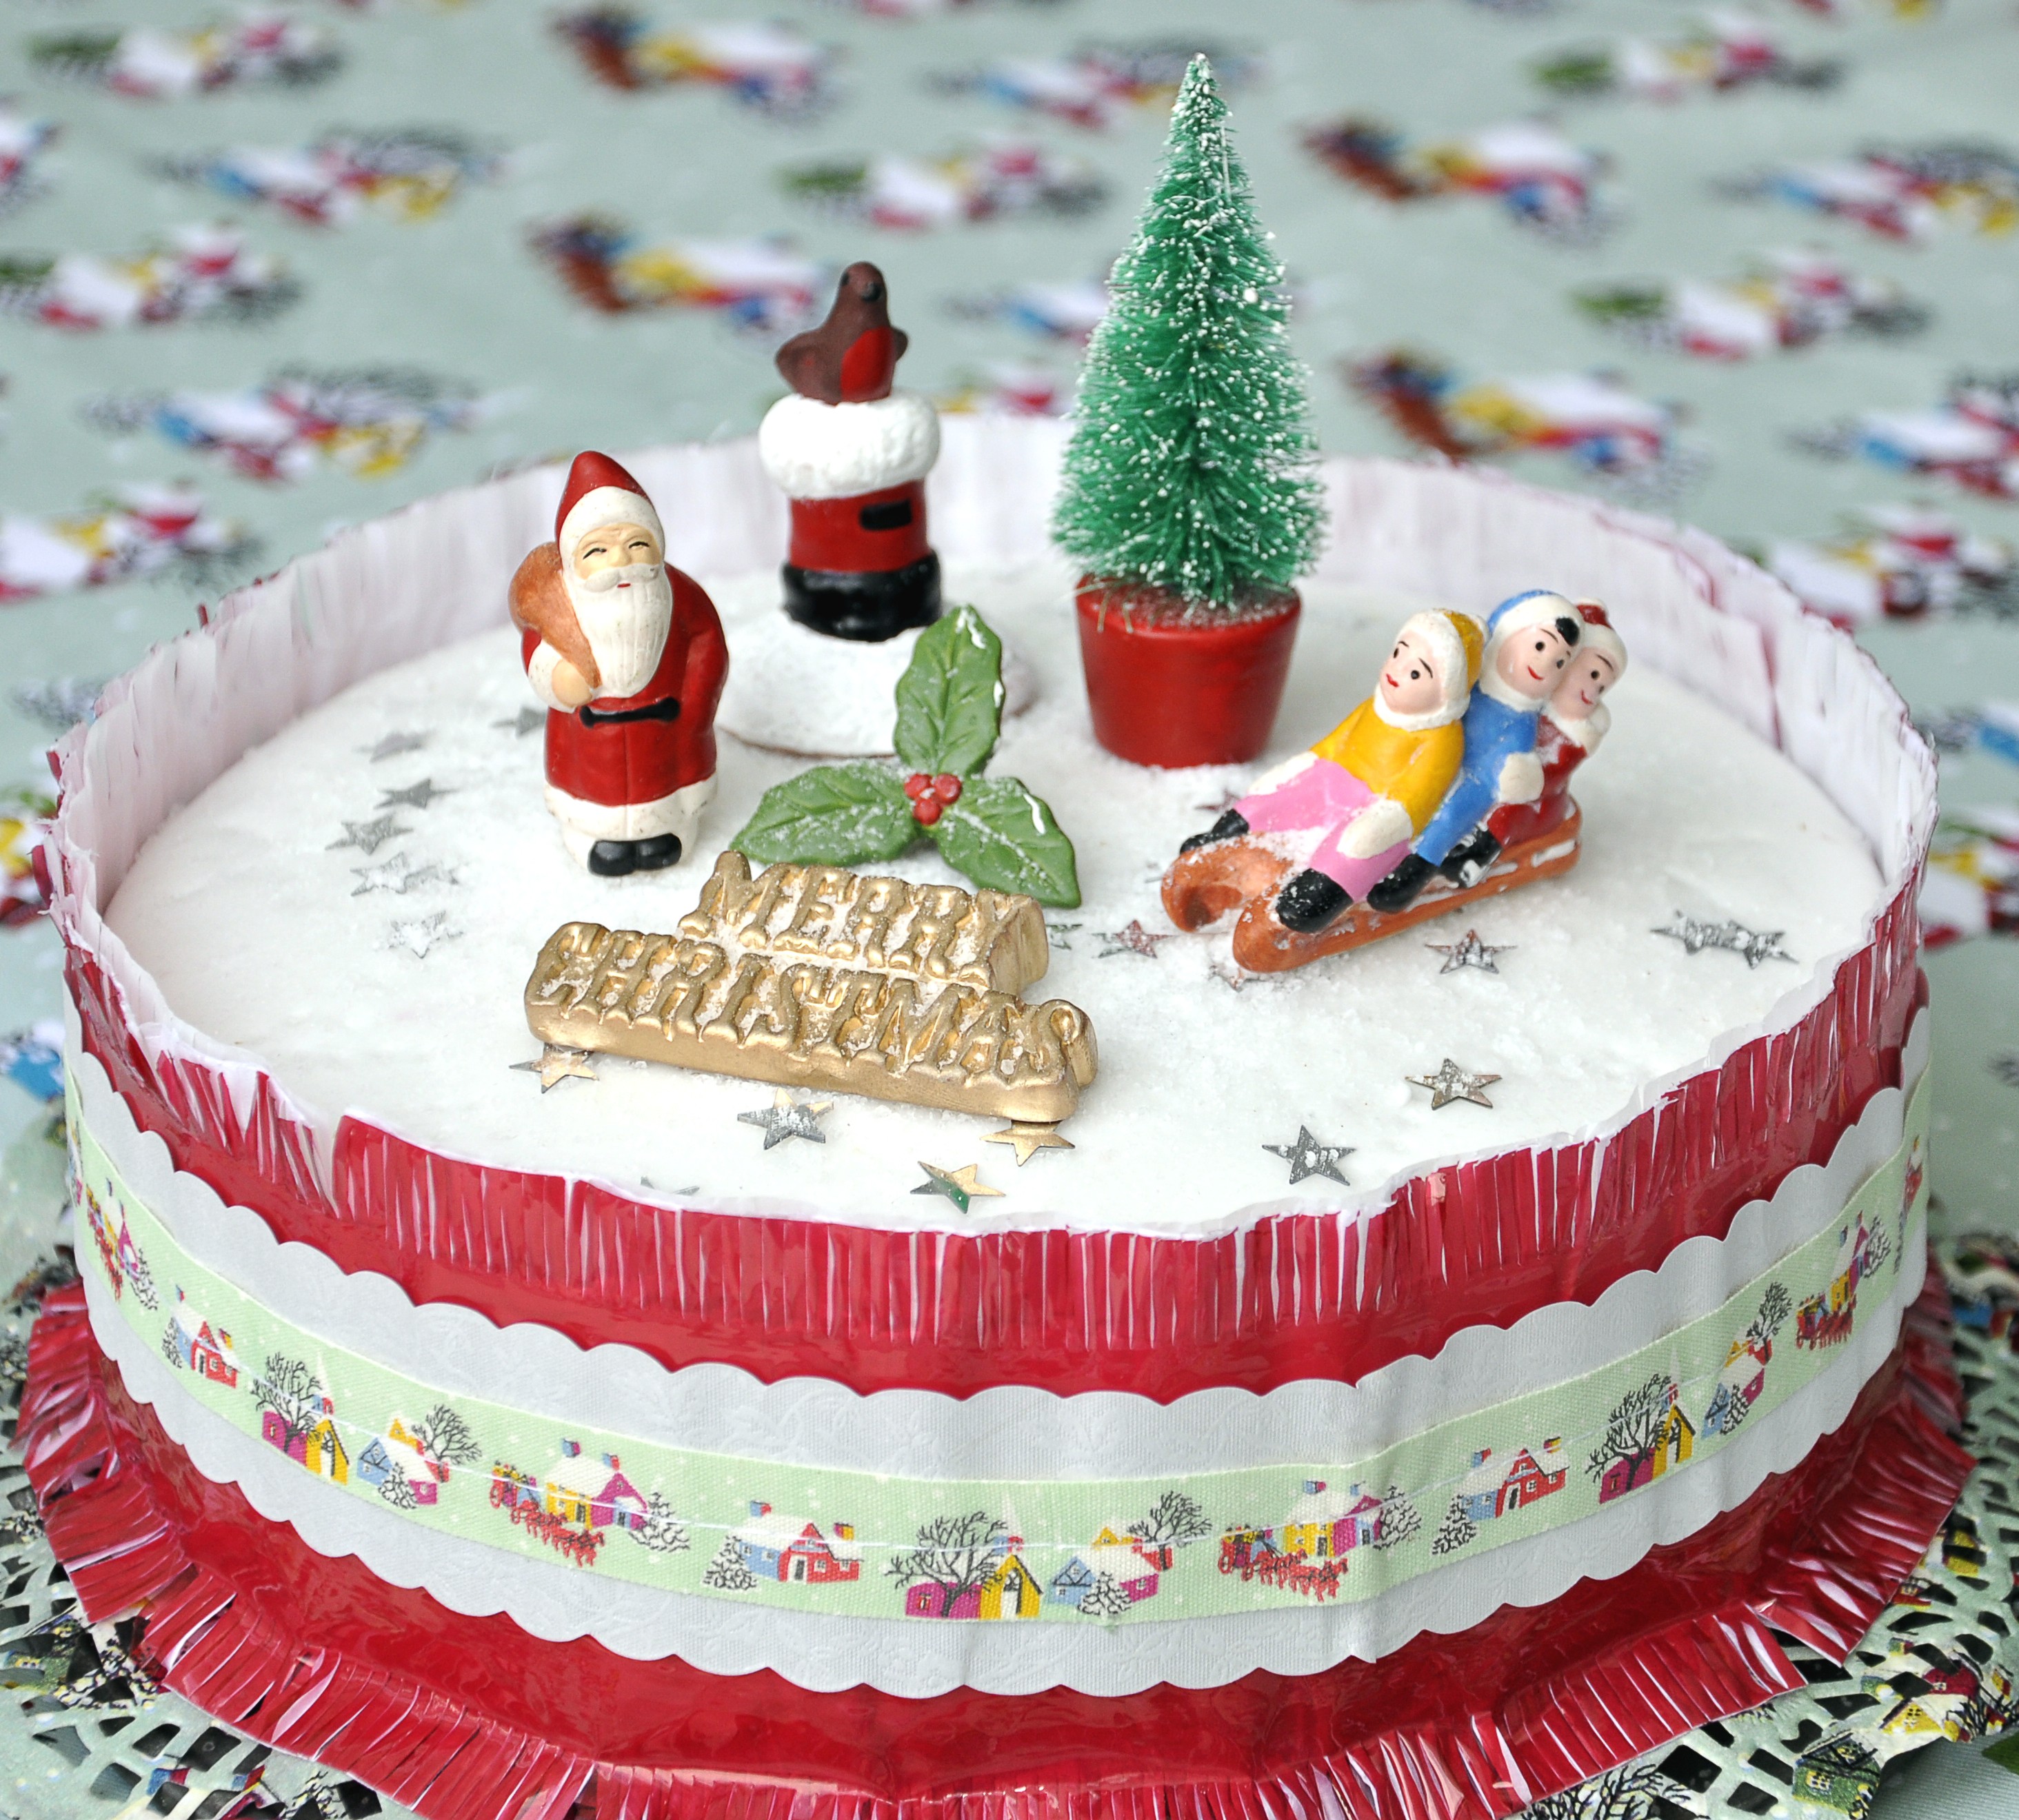 21 Christmas Cake Ideas to Serve on Your Christmas Day